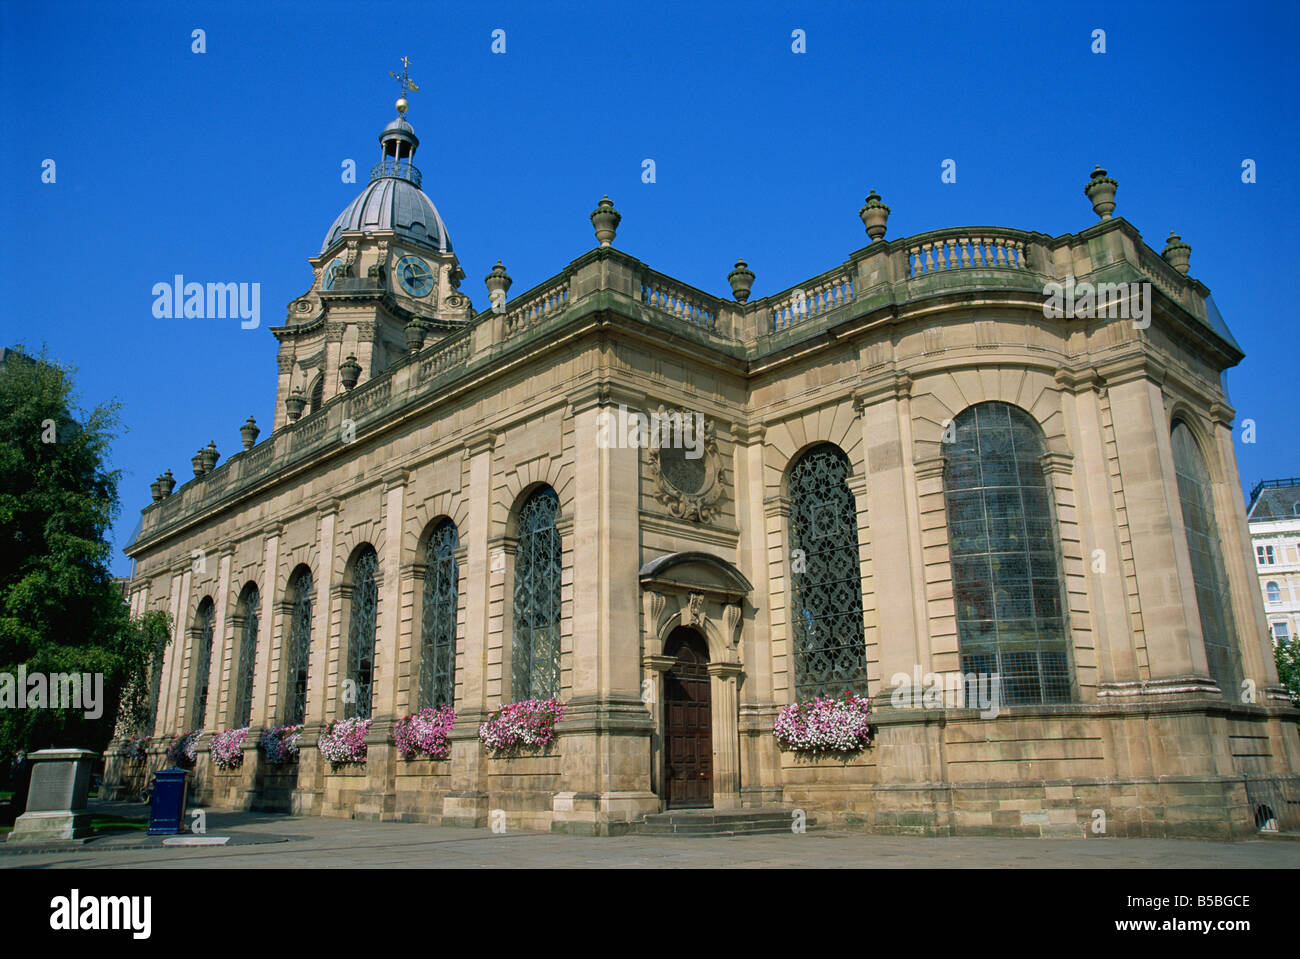 St. Philips Cathedral dating from 1715, Birmingham, England, Europe Stock Photo